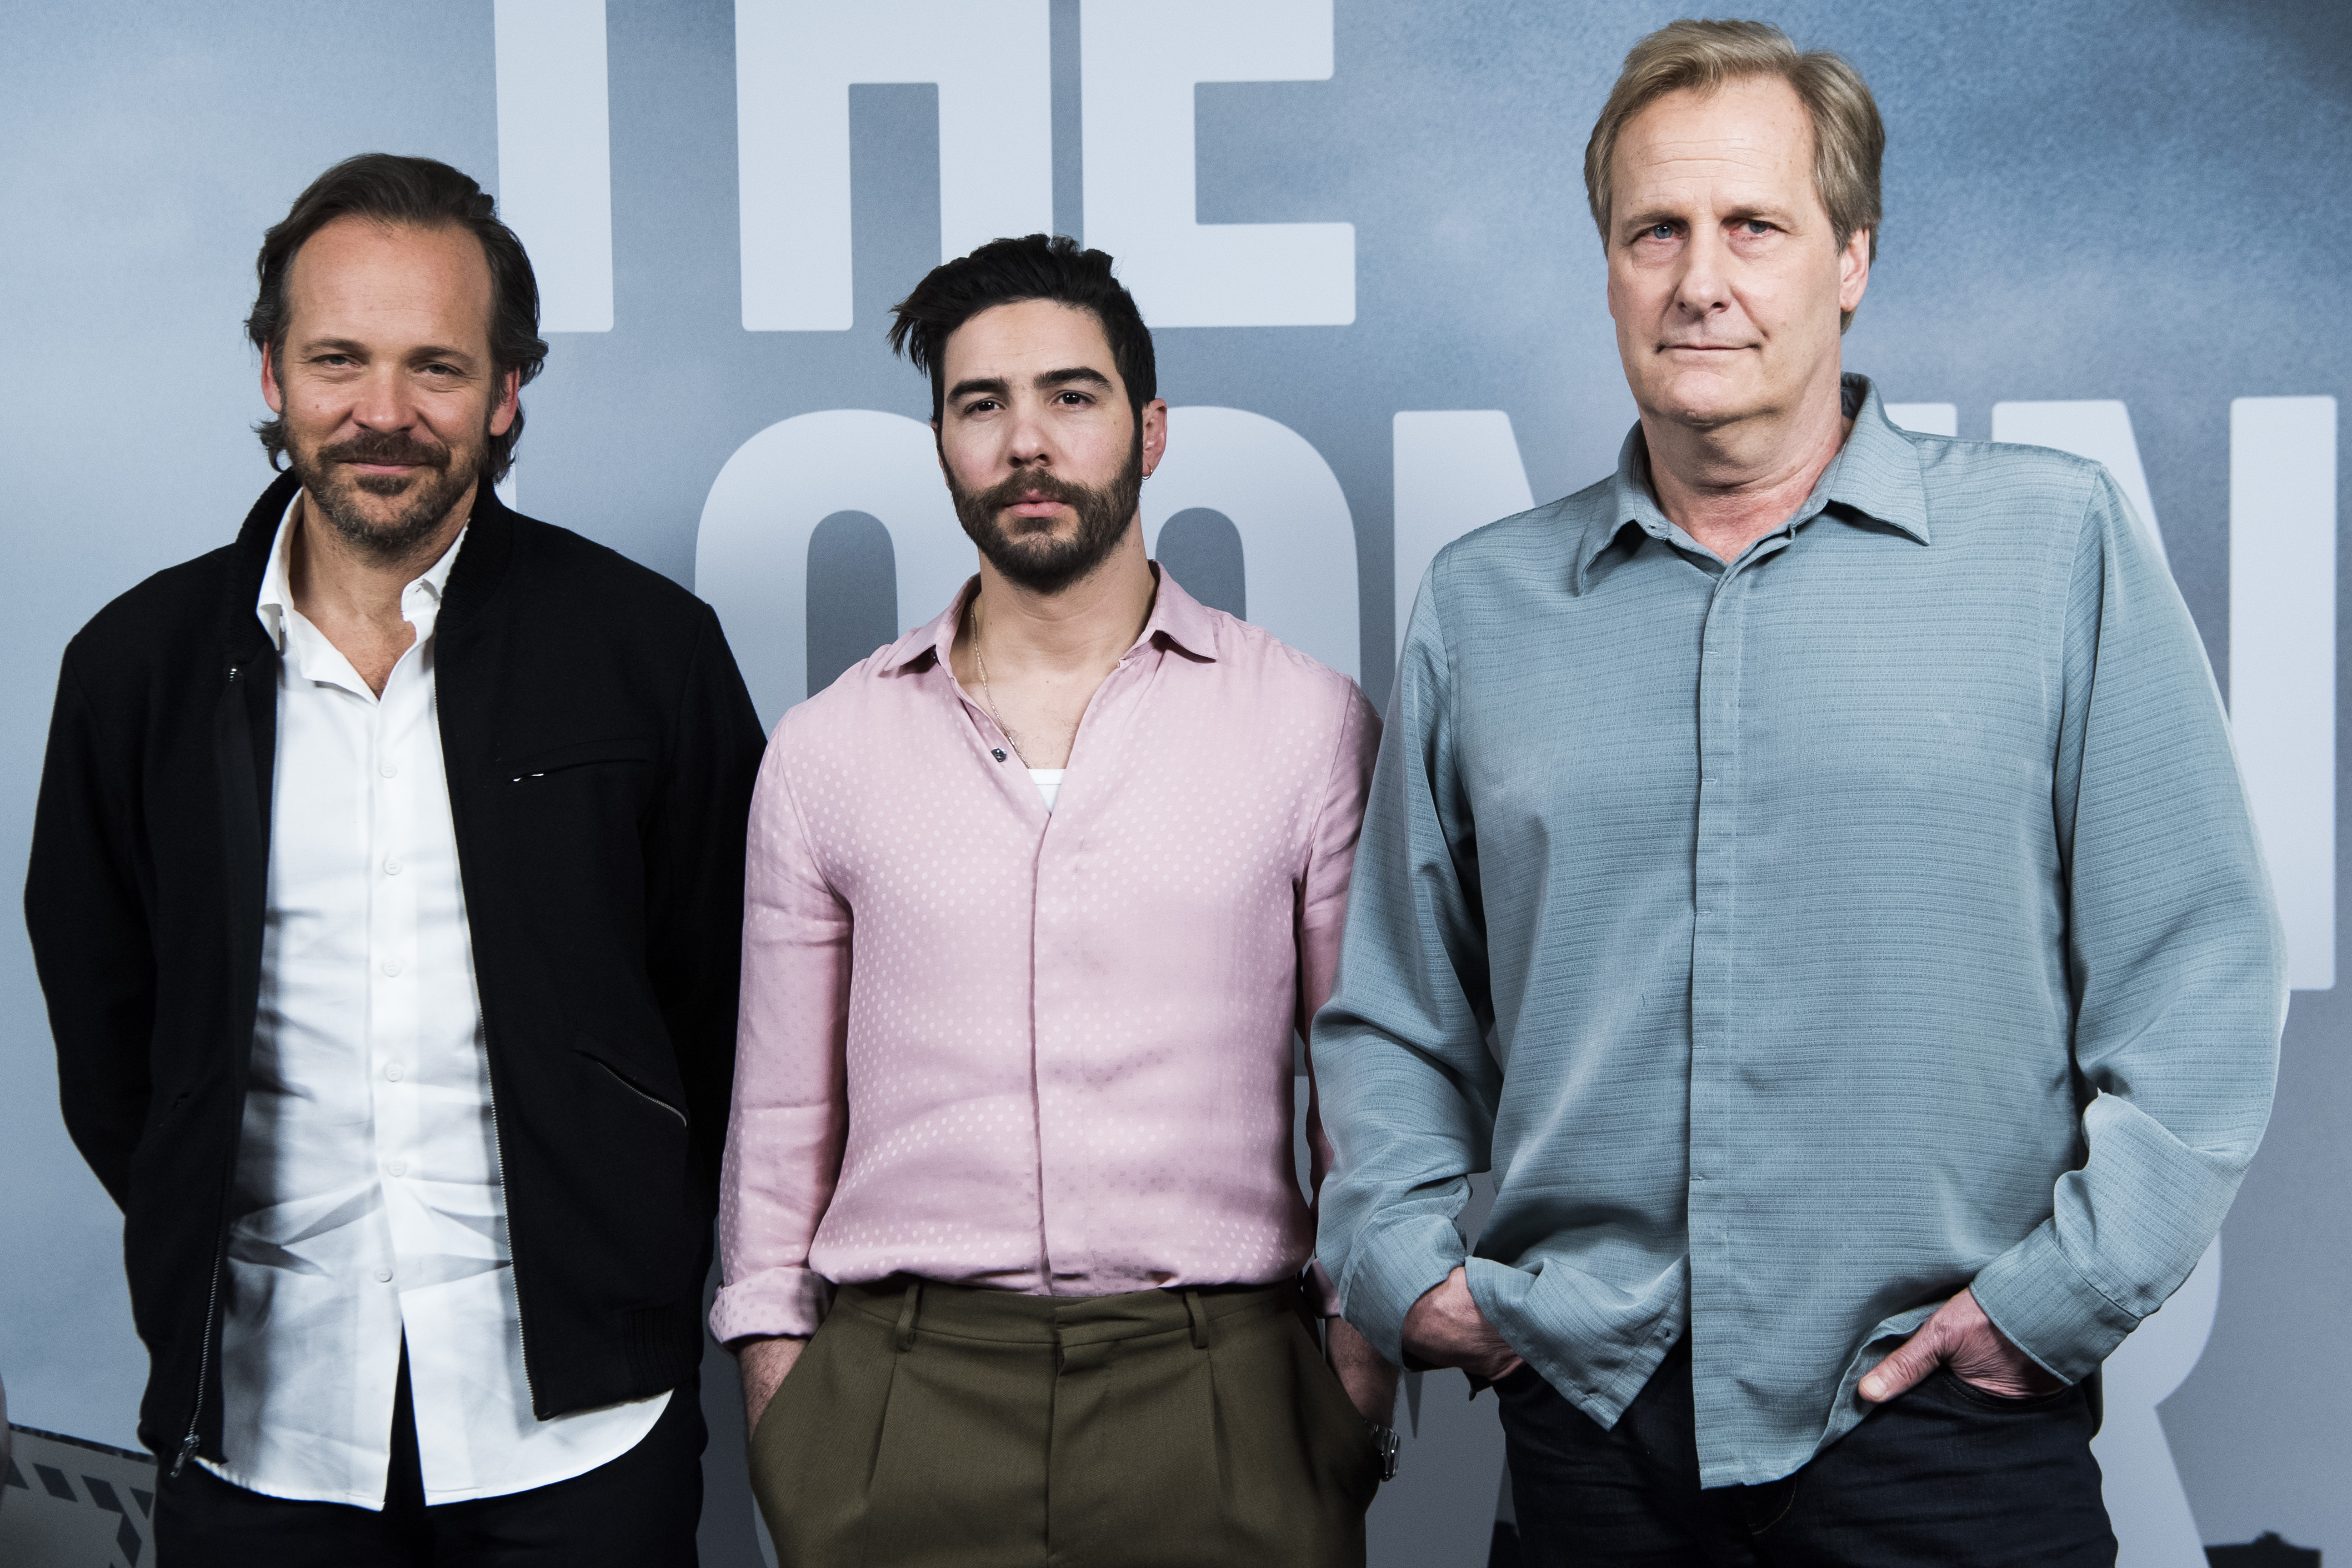 Peter Sarsgaard, Tahar Rahim &amp; Jeff Daniels at a press conference for &#x27;The Looming Tower&#x27;